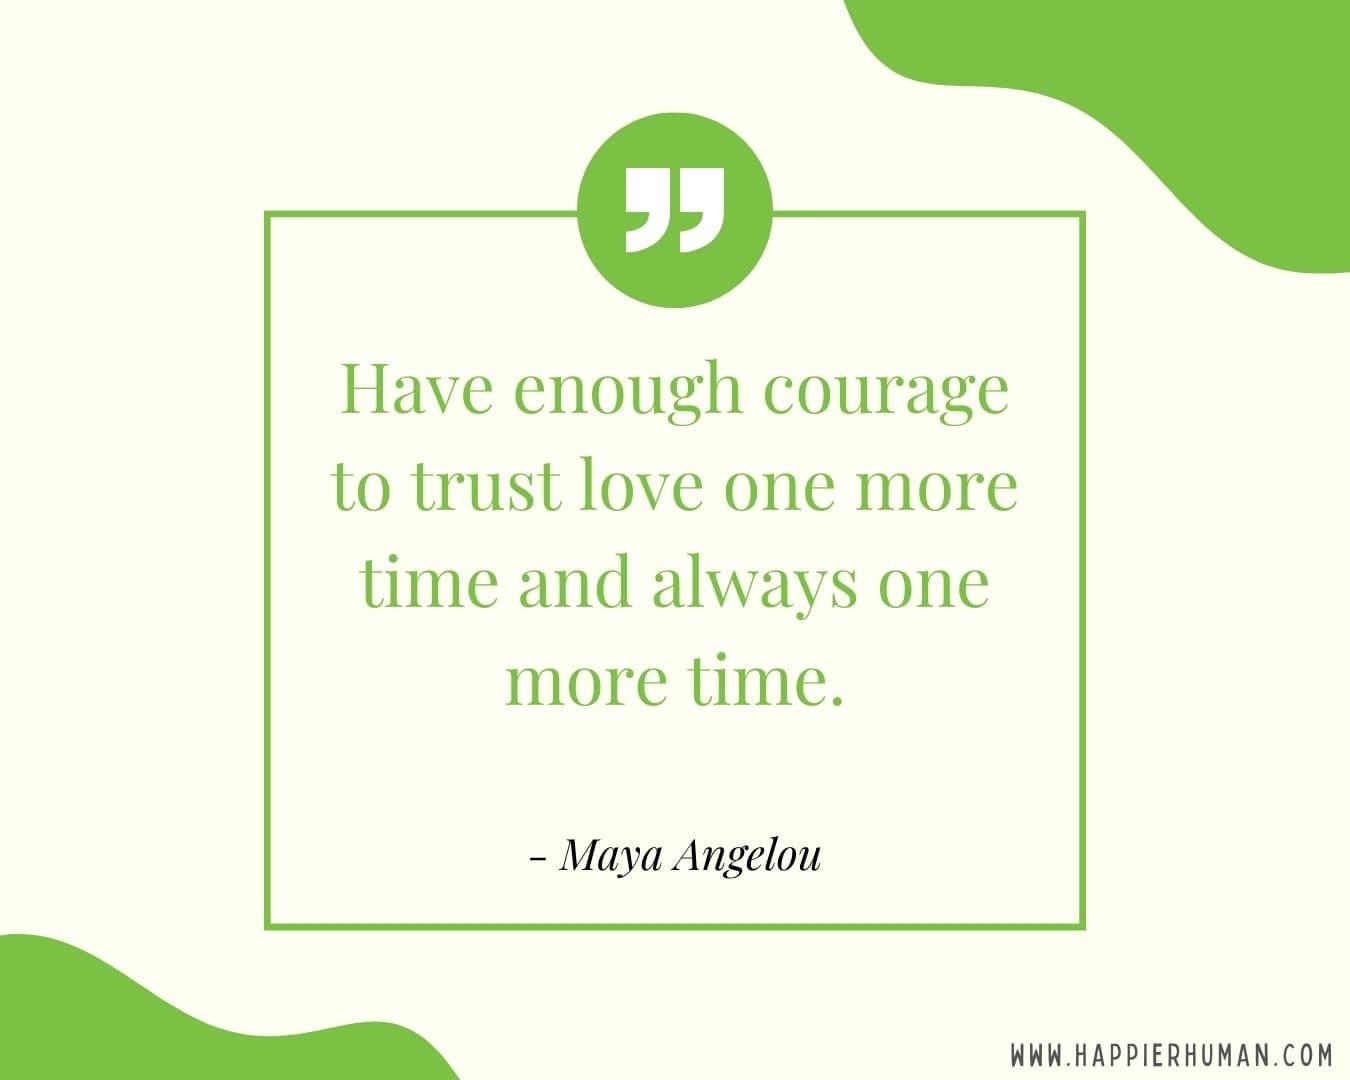 Broken Trust Quotes - “Have enough courage to trust love one more time and always one more time.” - Maya Angelou